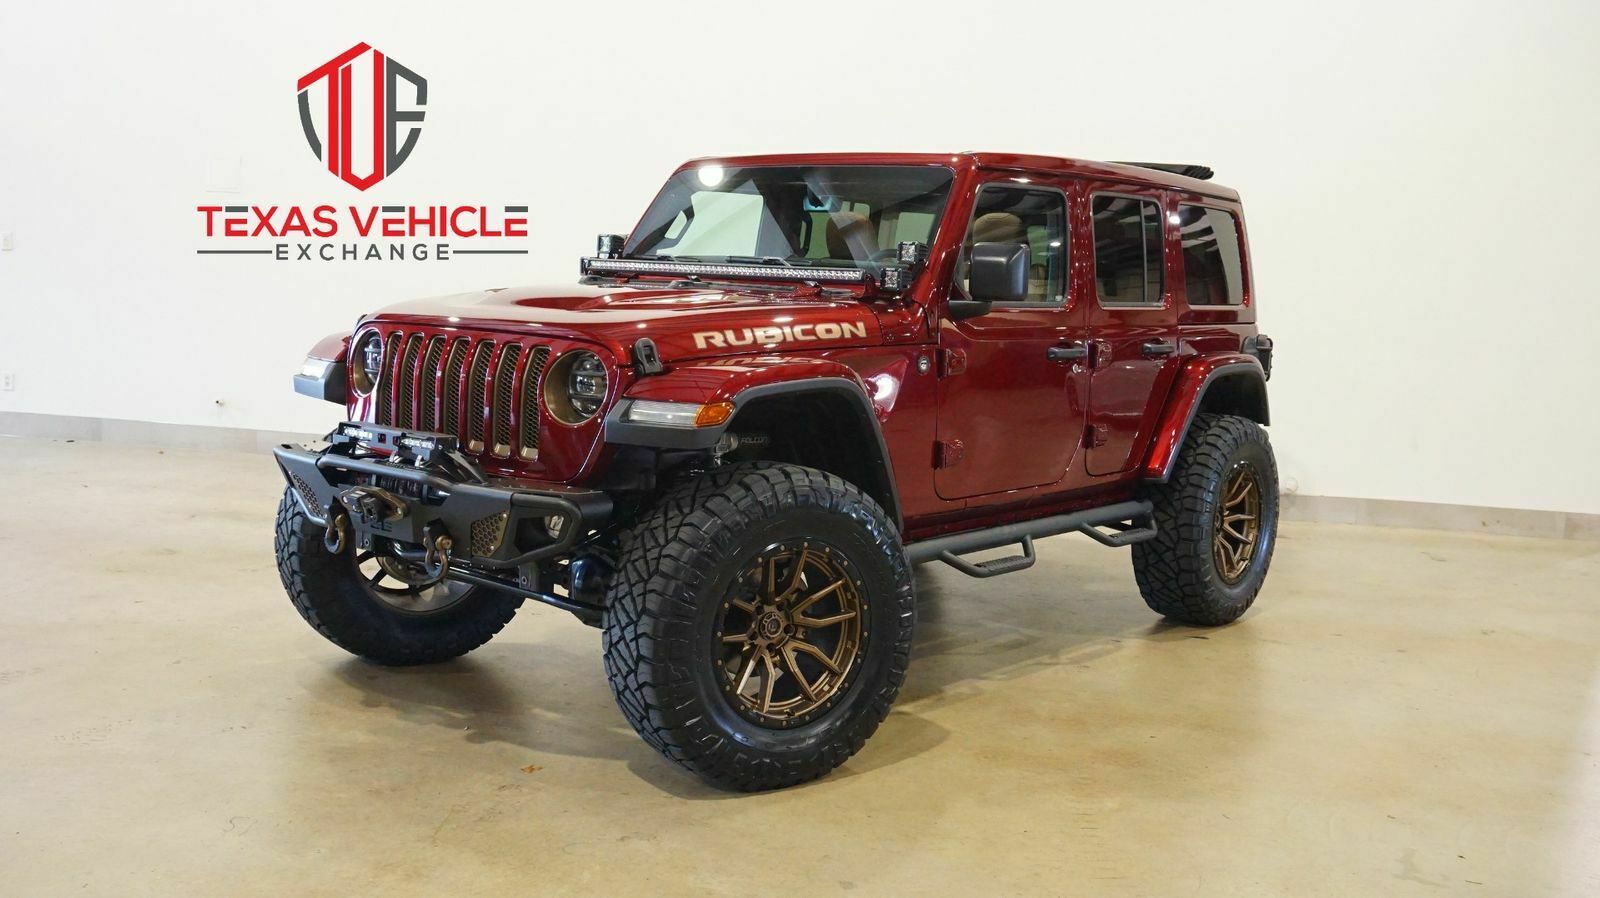 2021 Jeep Wrangler Unlimited Rubicon 4x4 Sky Top,lifted,bumpers,led's,nav 2021 Burgundy Rubicon 4x4 Sky Top,lifted,bumpers,led's,nav!